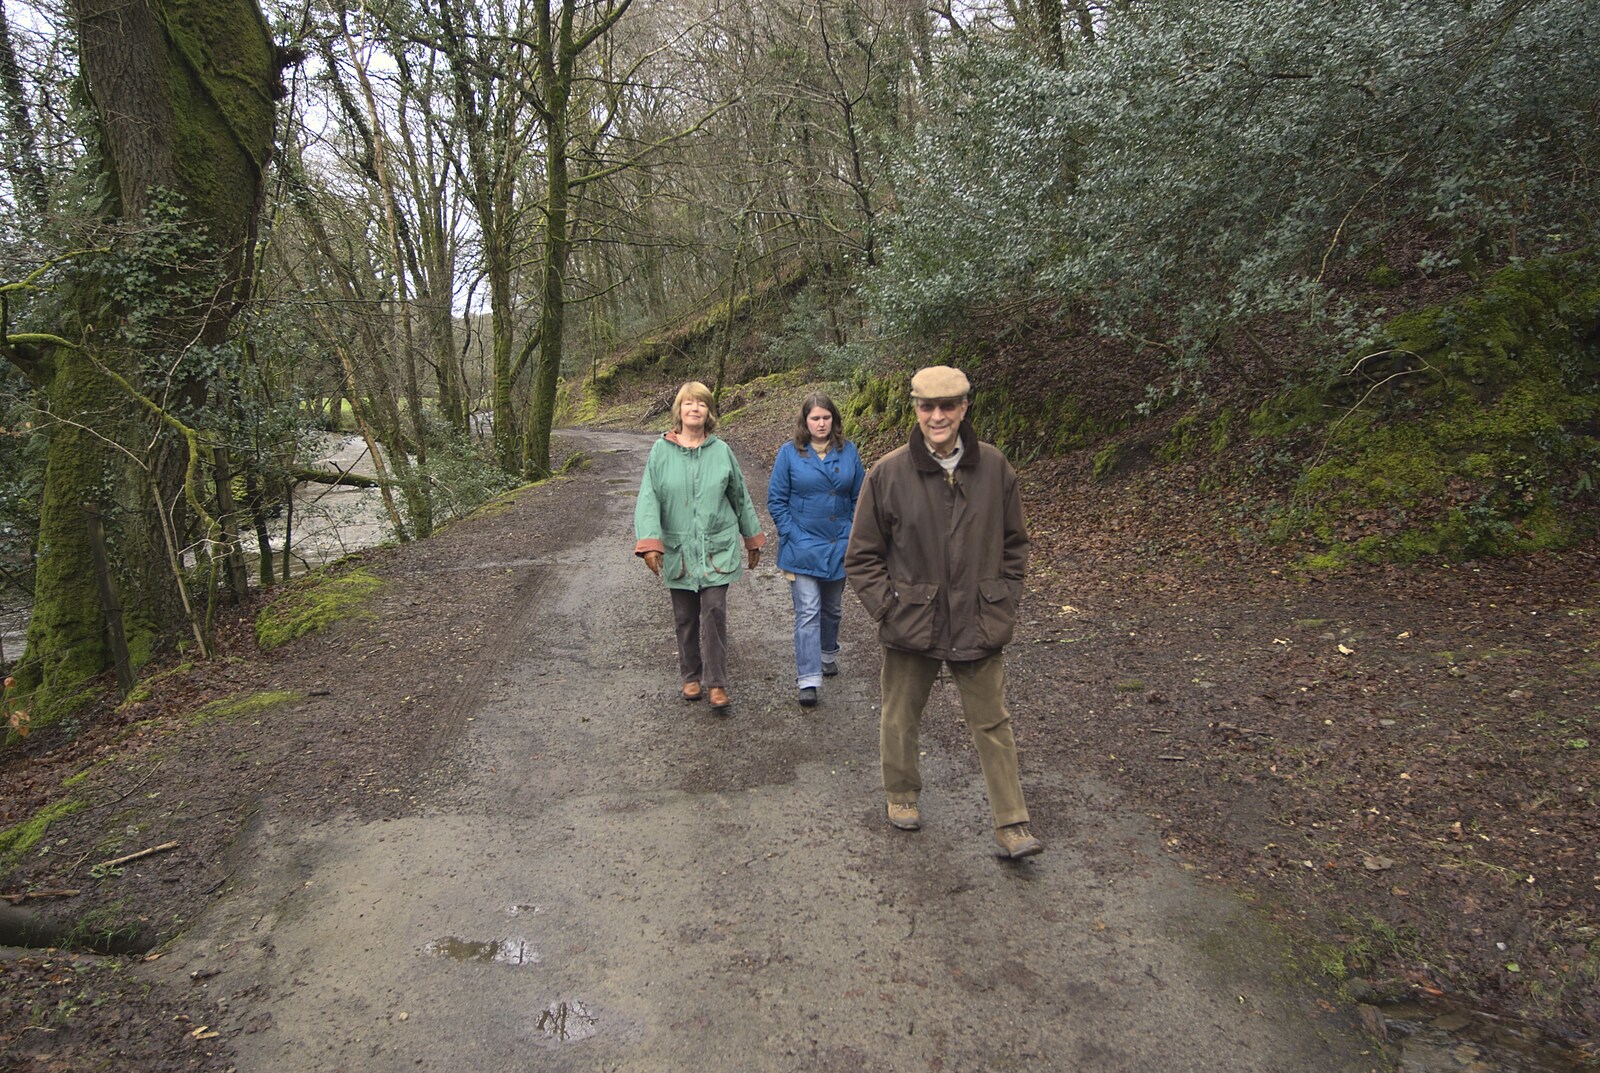 Mother, Isobel and Mike Strolling down by the river from Easter in Chagford and Hoo Meavy, Devon - 3rd April 2010